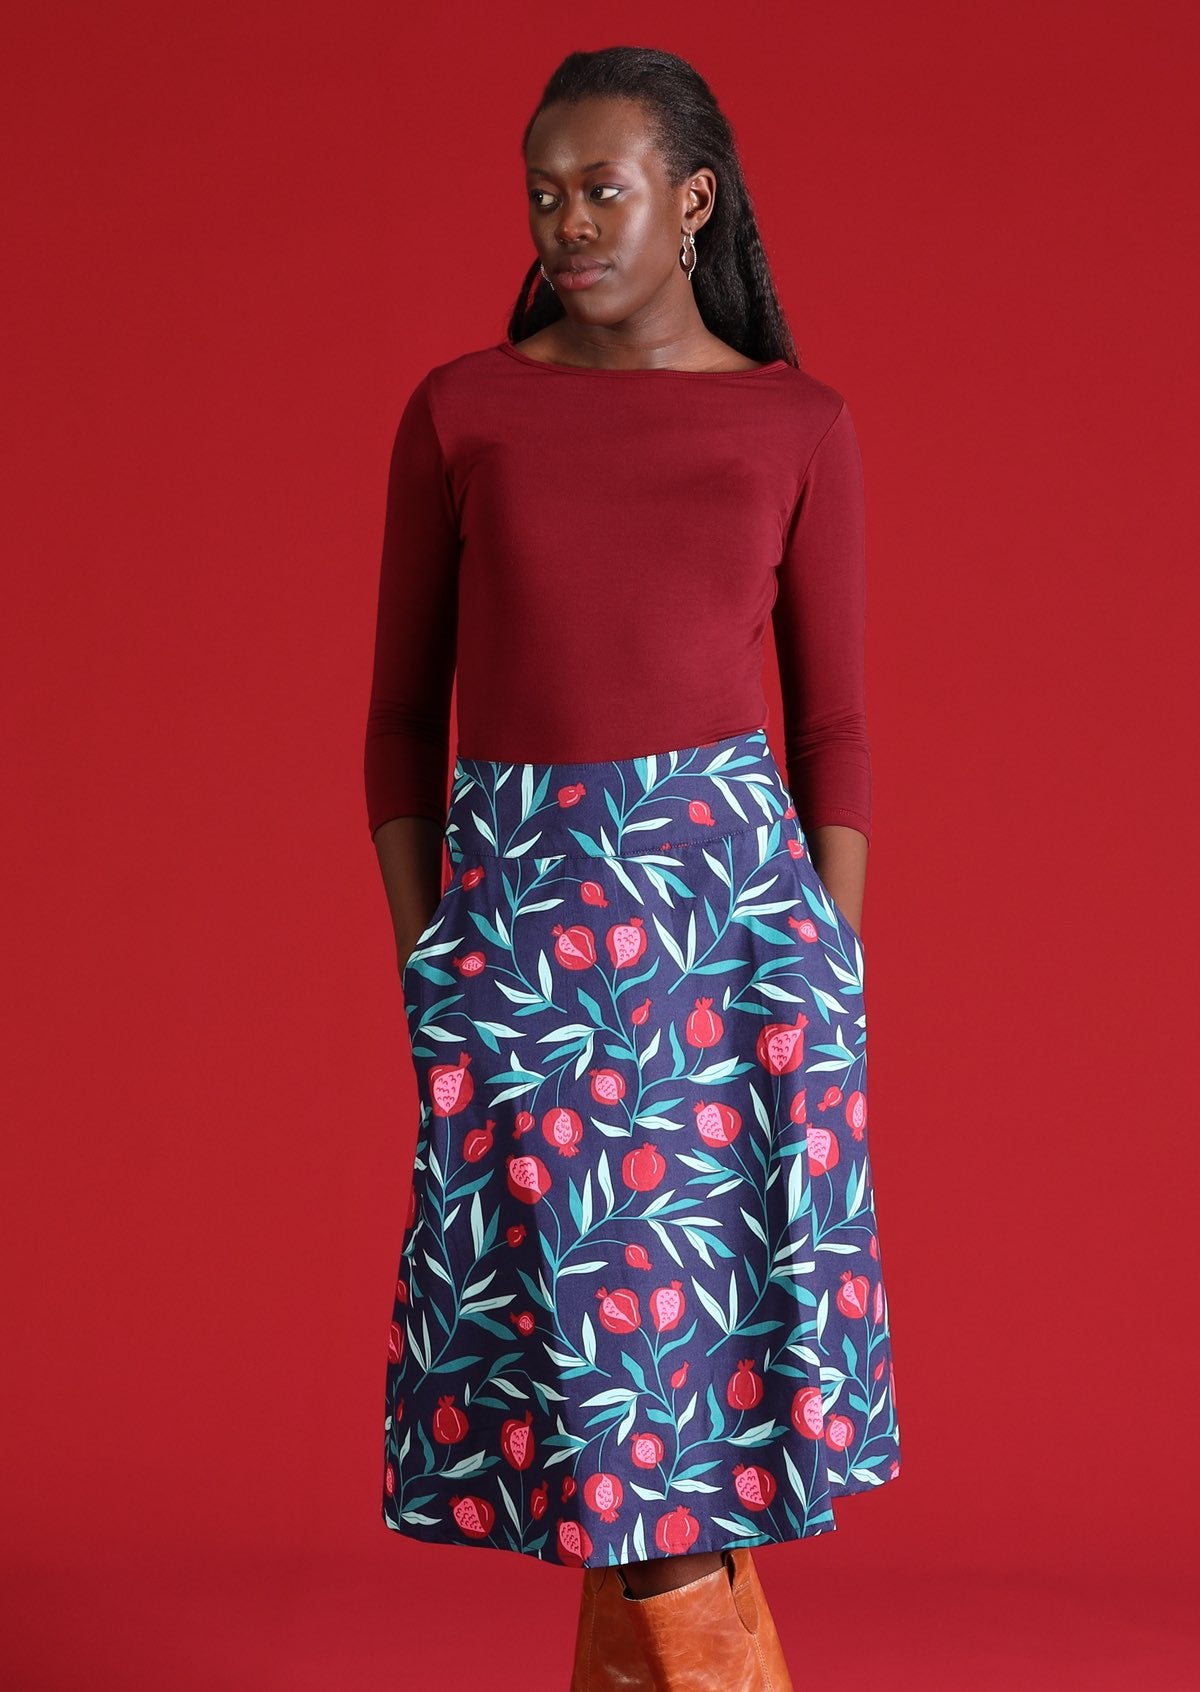 Model wears a 100% cotton blue A-line skirt with a fruit print on it. This mid length skirt sits below the knee.